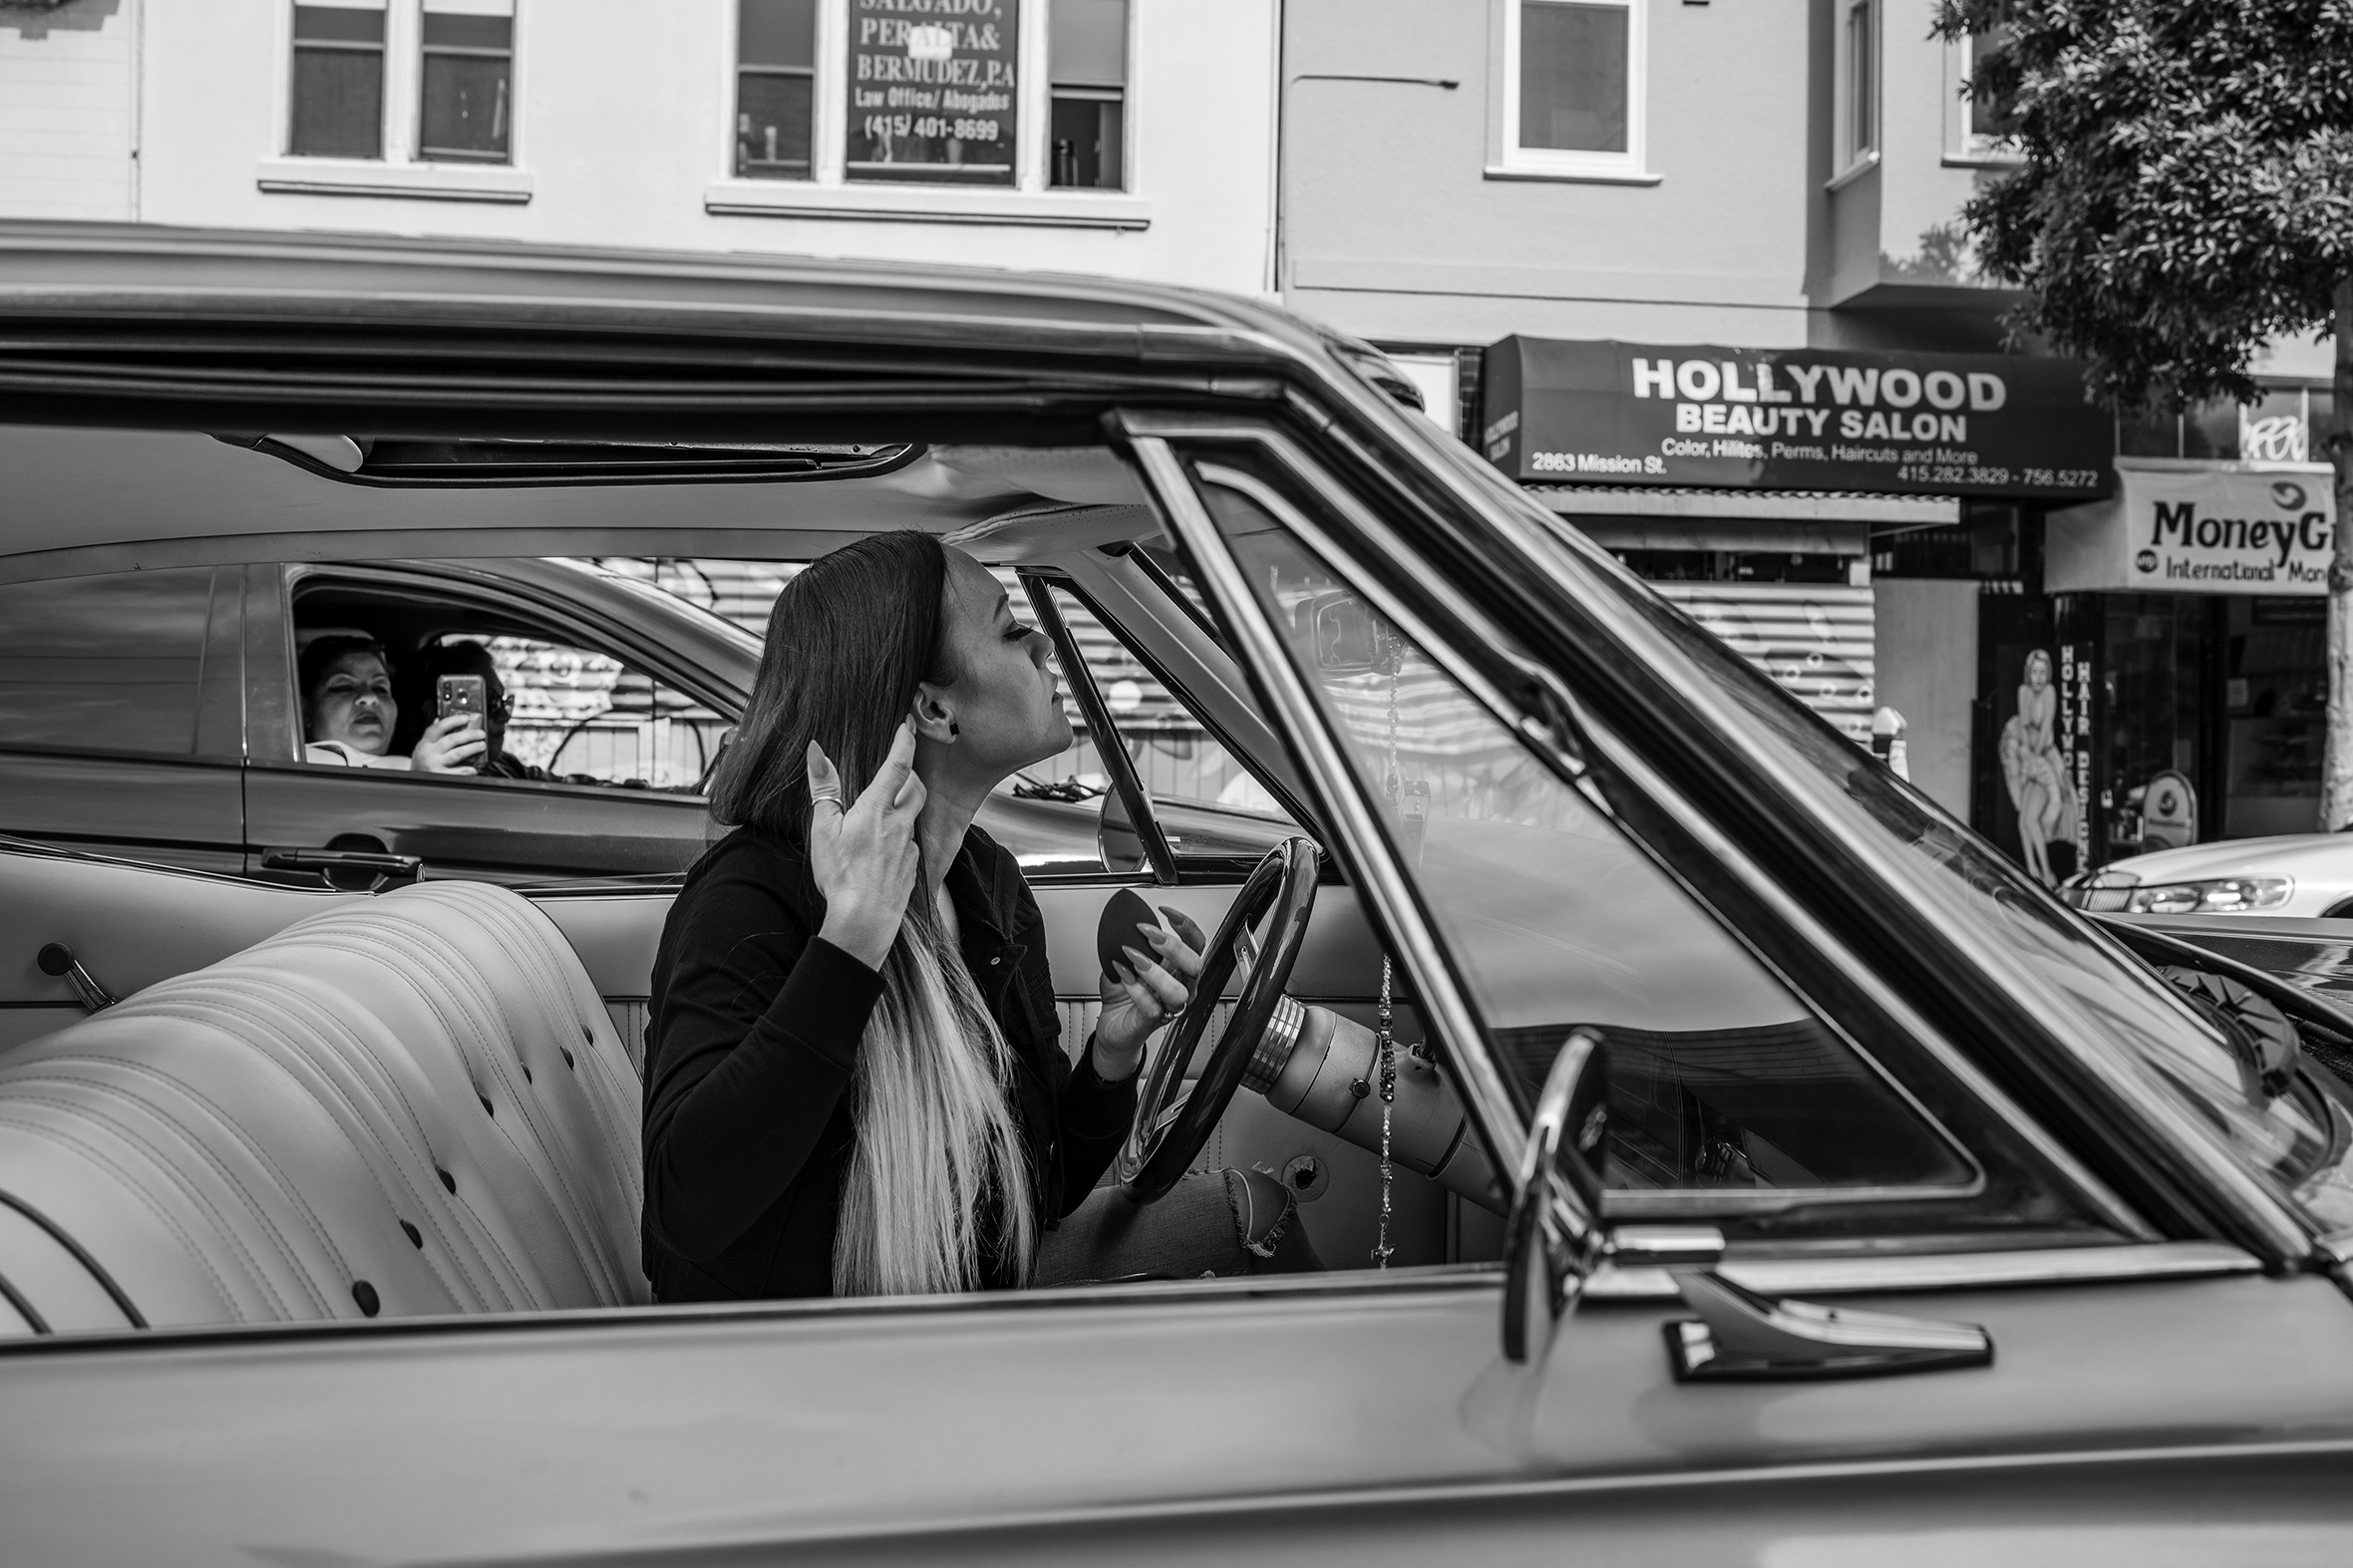 A woman is sitting in a car with a front bench seat and looking in the rearview mirror at her long, straight, ombré hair as a woman in a passing car is taking her photo with a cell phone. Across the street is a sign for the Hollywood Beauty Salon.